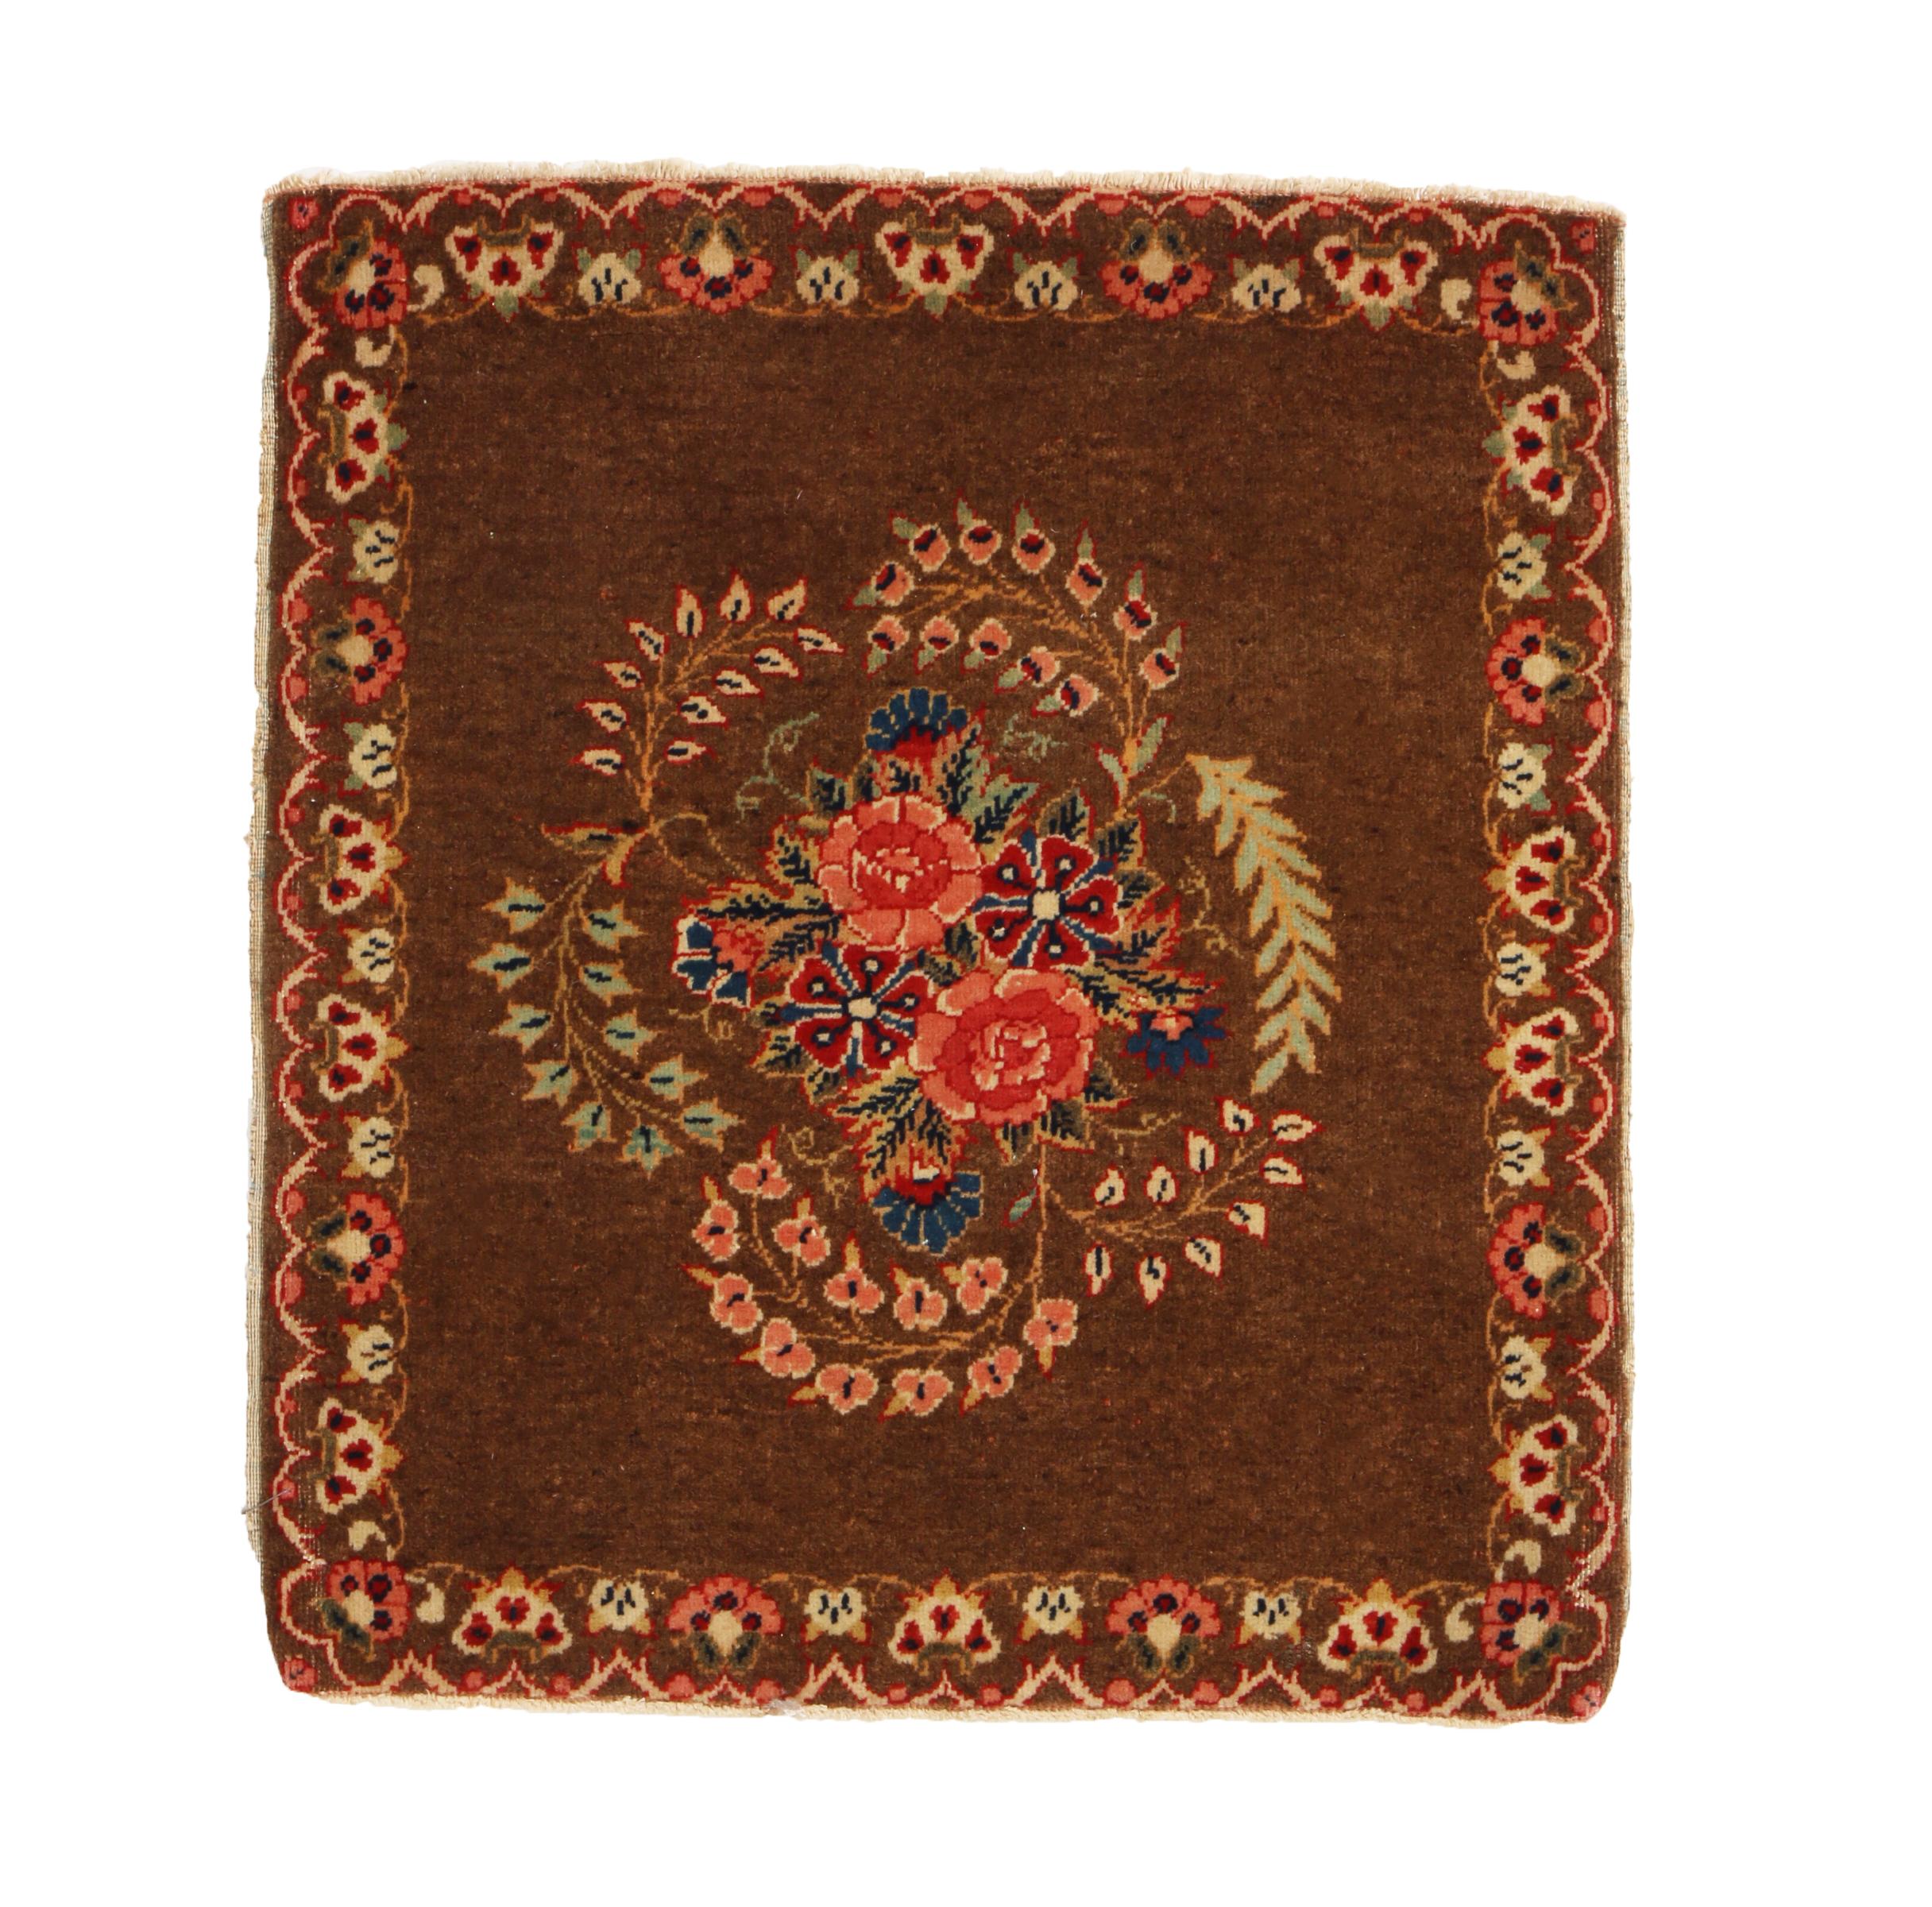 Originating from Persia in 1900, this hand knotted wool antique Persian rug enjoys a distinguished classical combination of rich brown, vivid pink and bright green colorways throughout an abrash field, complemented by highly stylized carnation